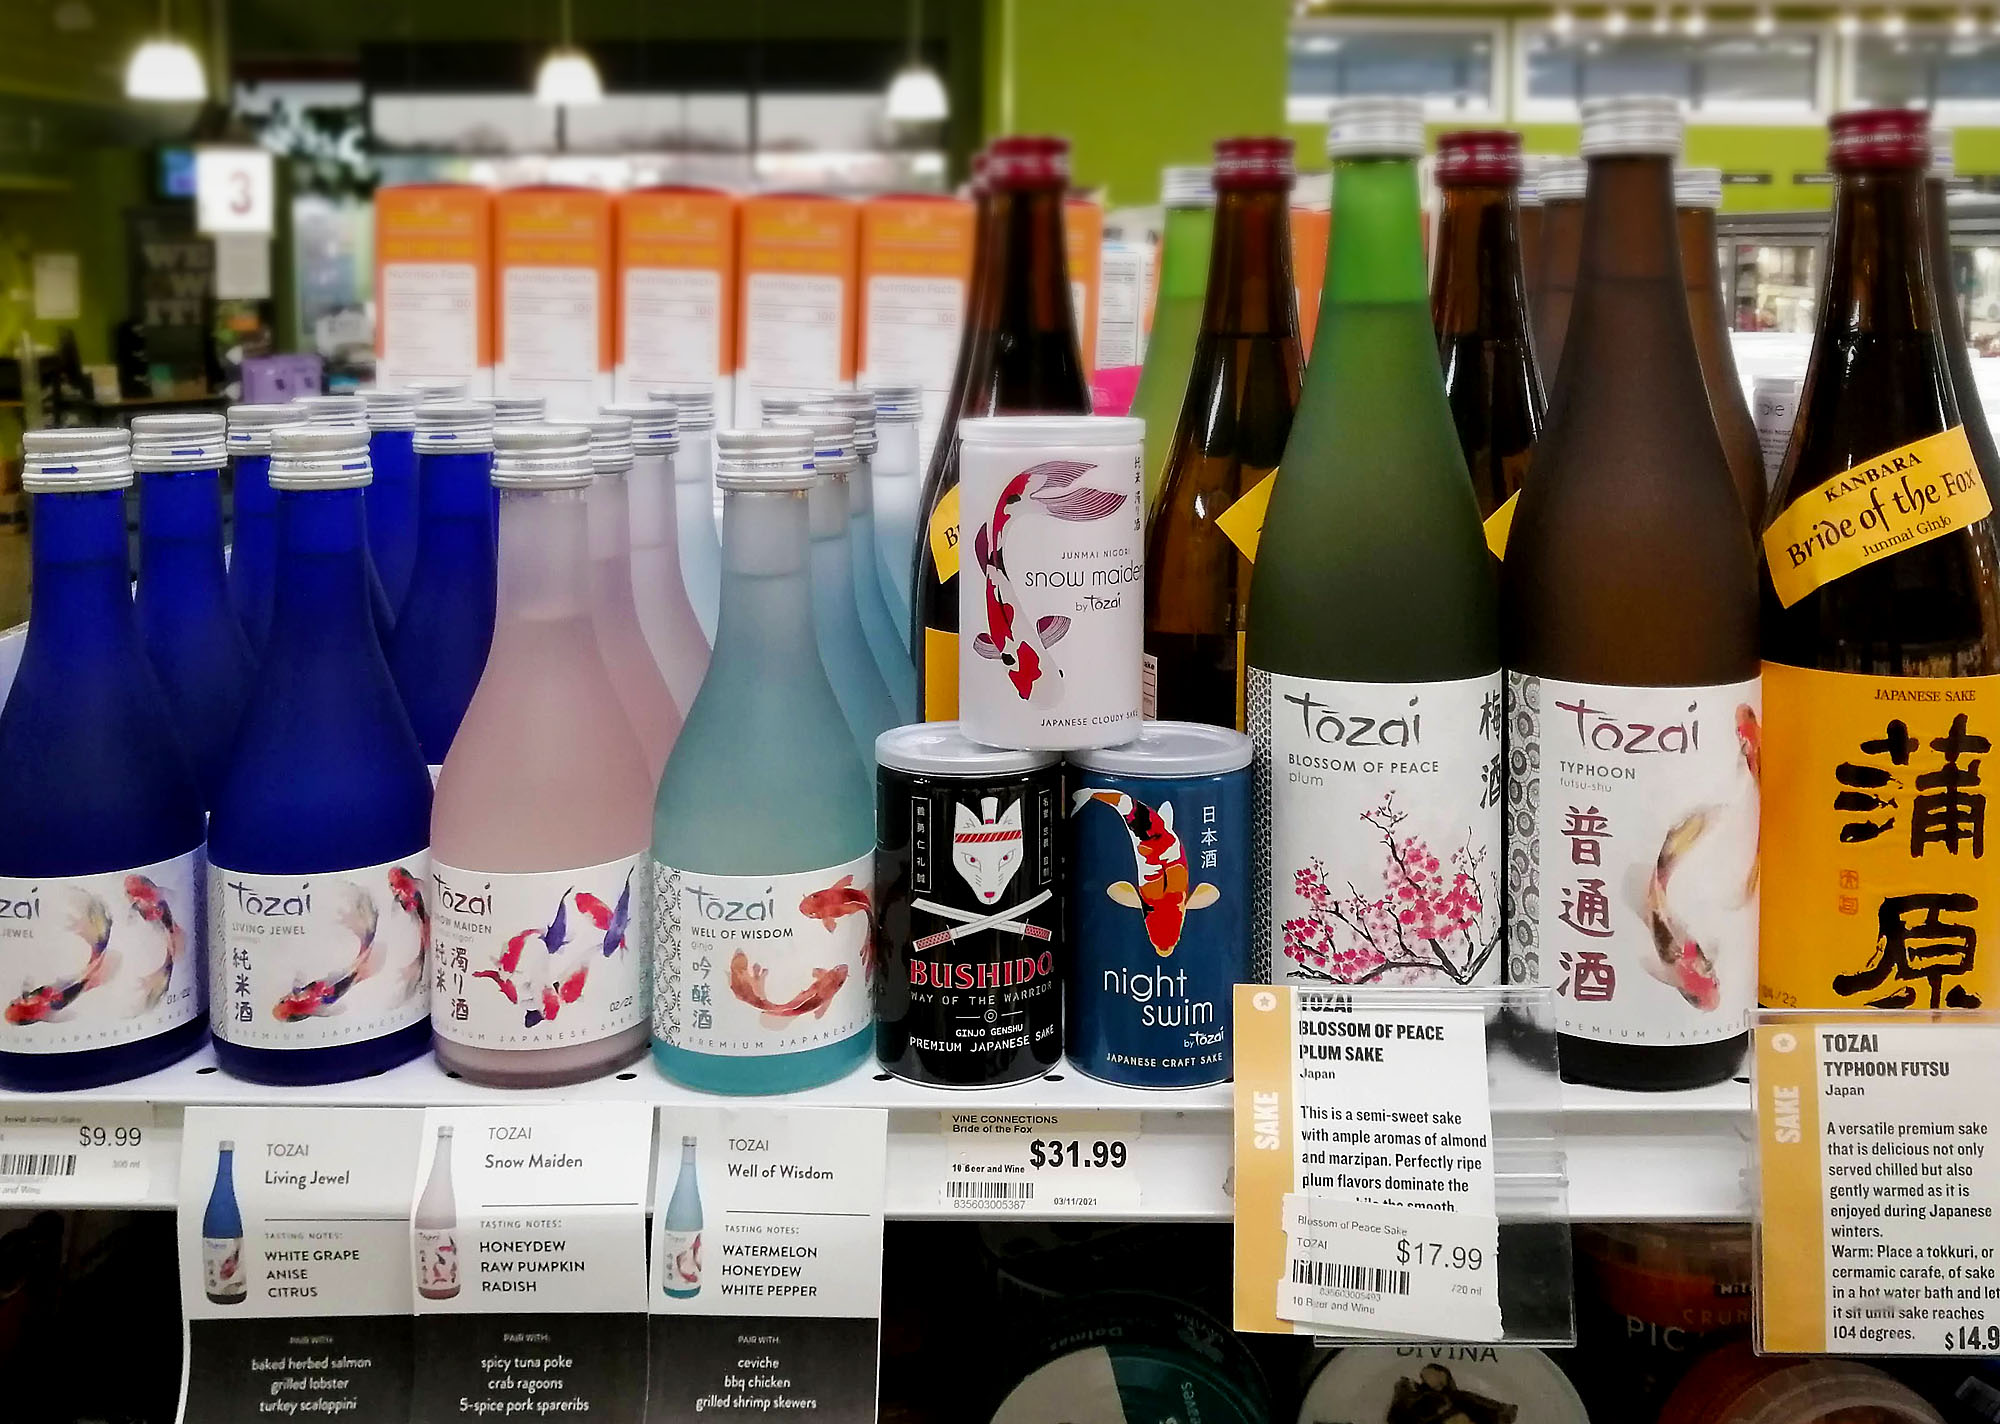 A display of various sake drinks in bottles and cans on a grocery shelf. Photo by Paul Young.